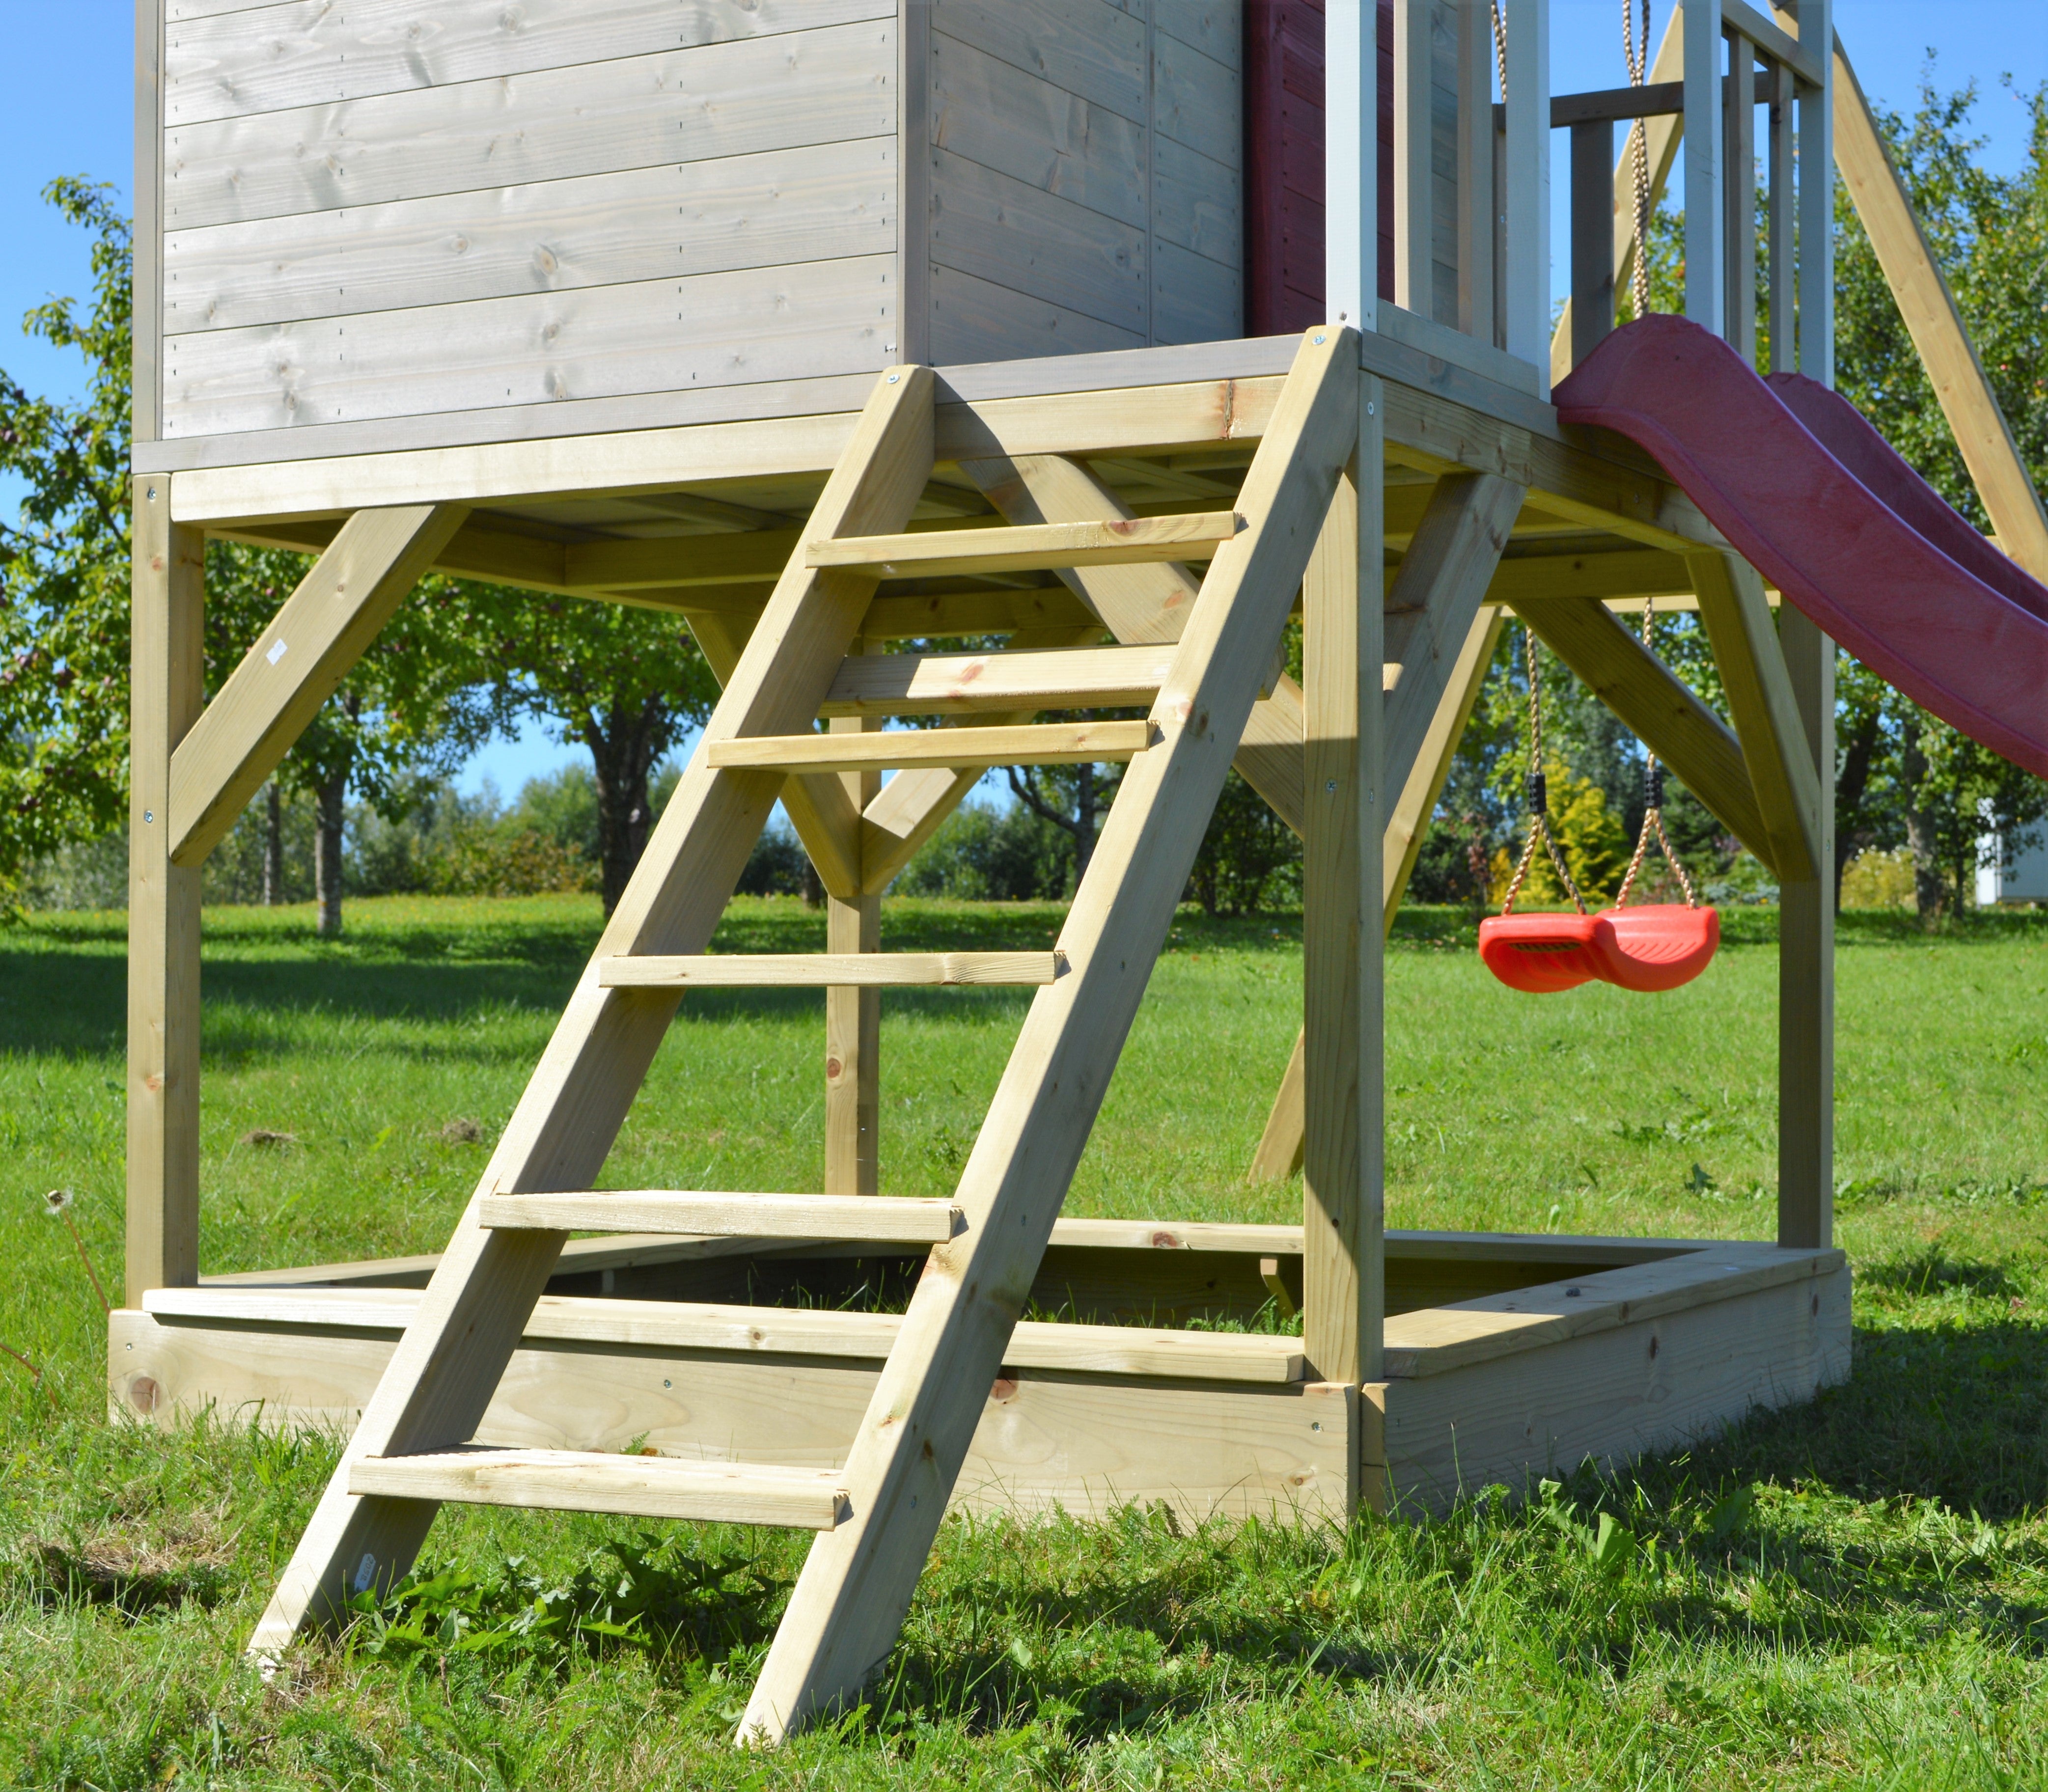 M9R Summer Adventure House with Platform, Slide and Single Swing